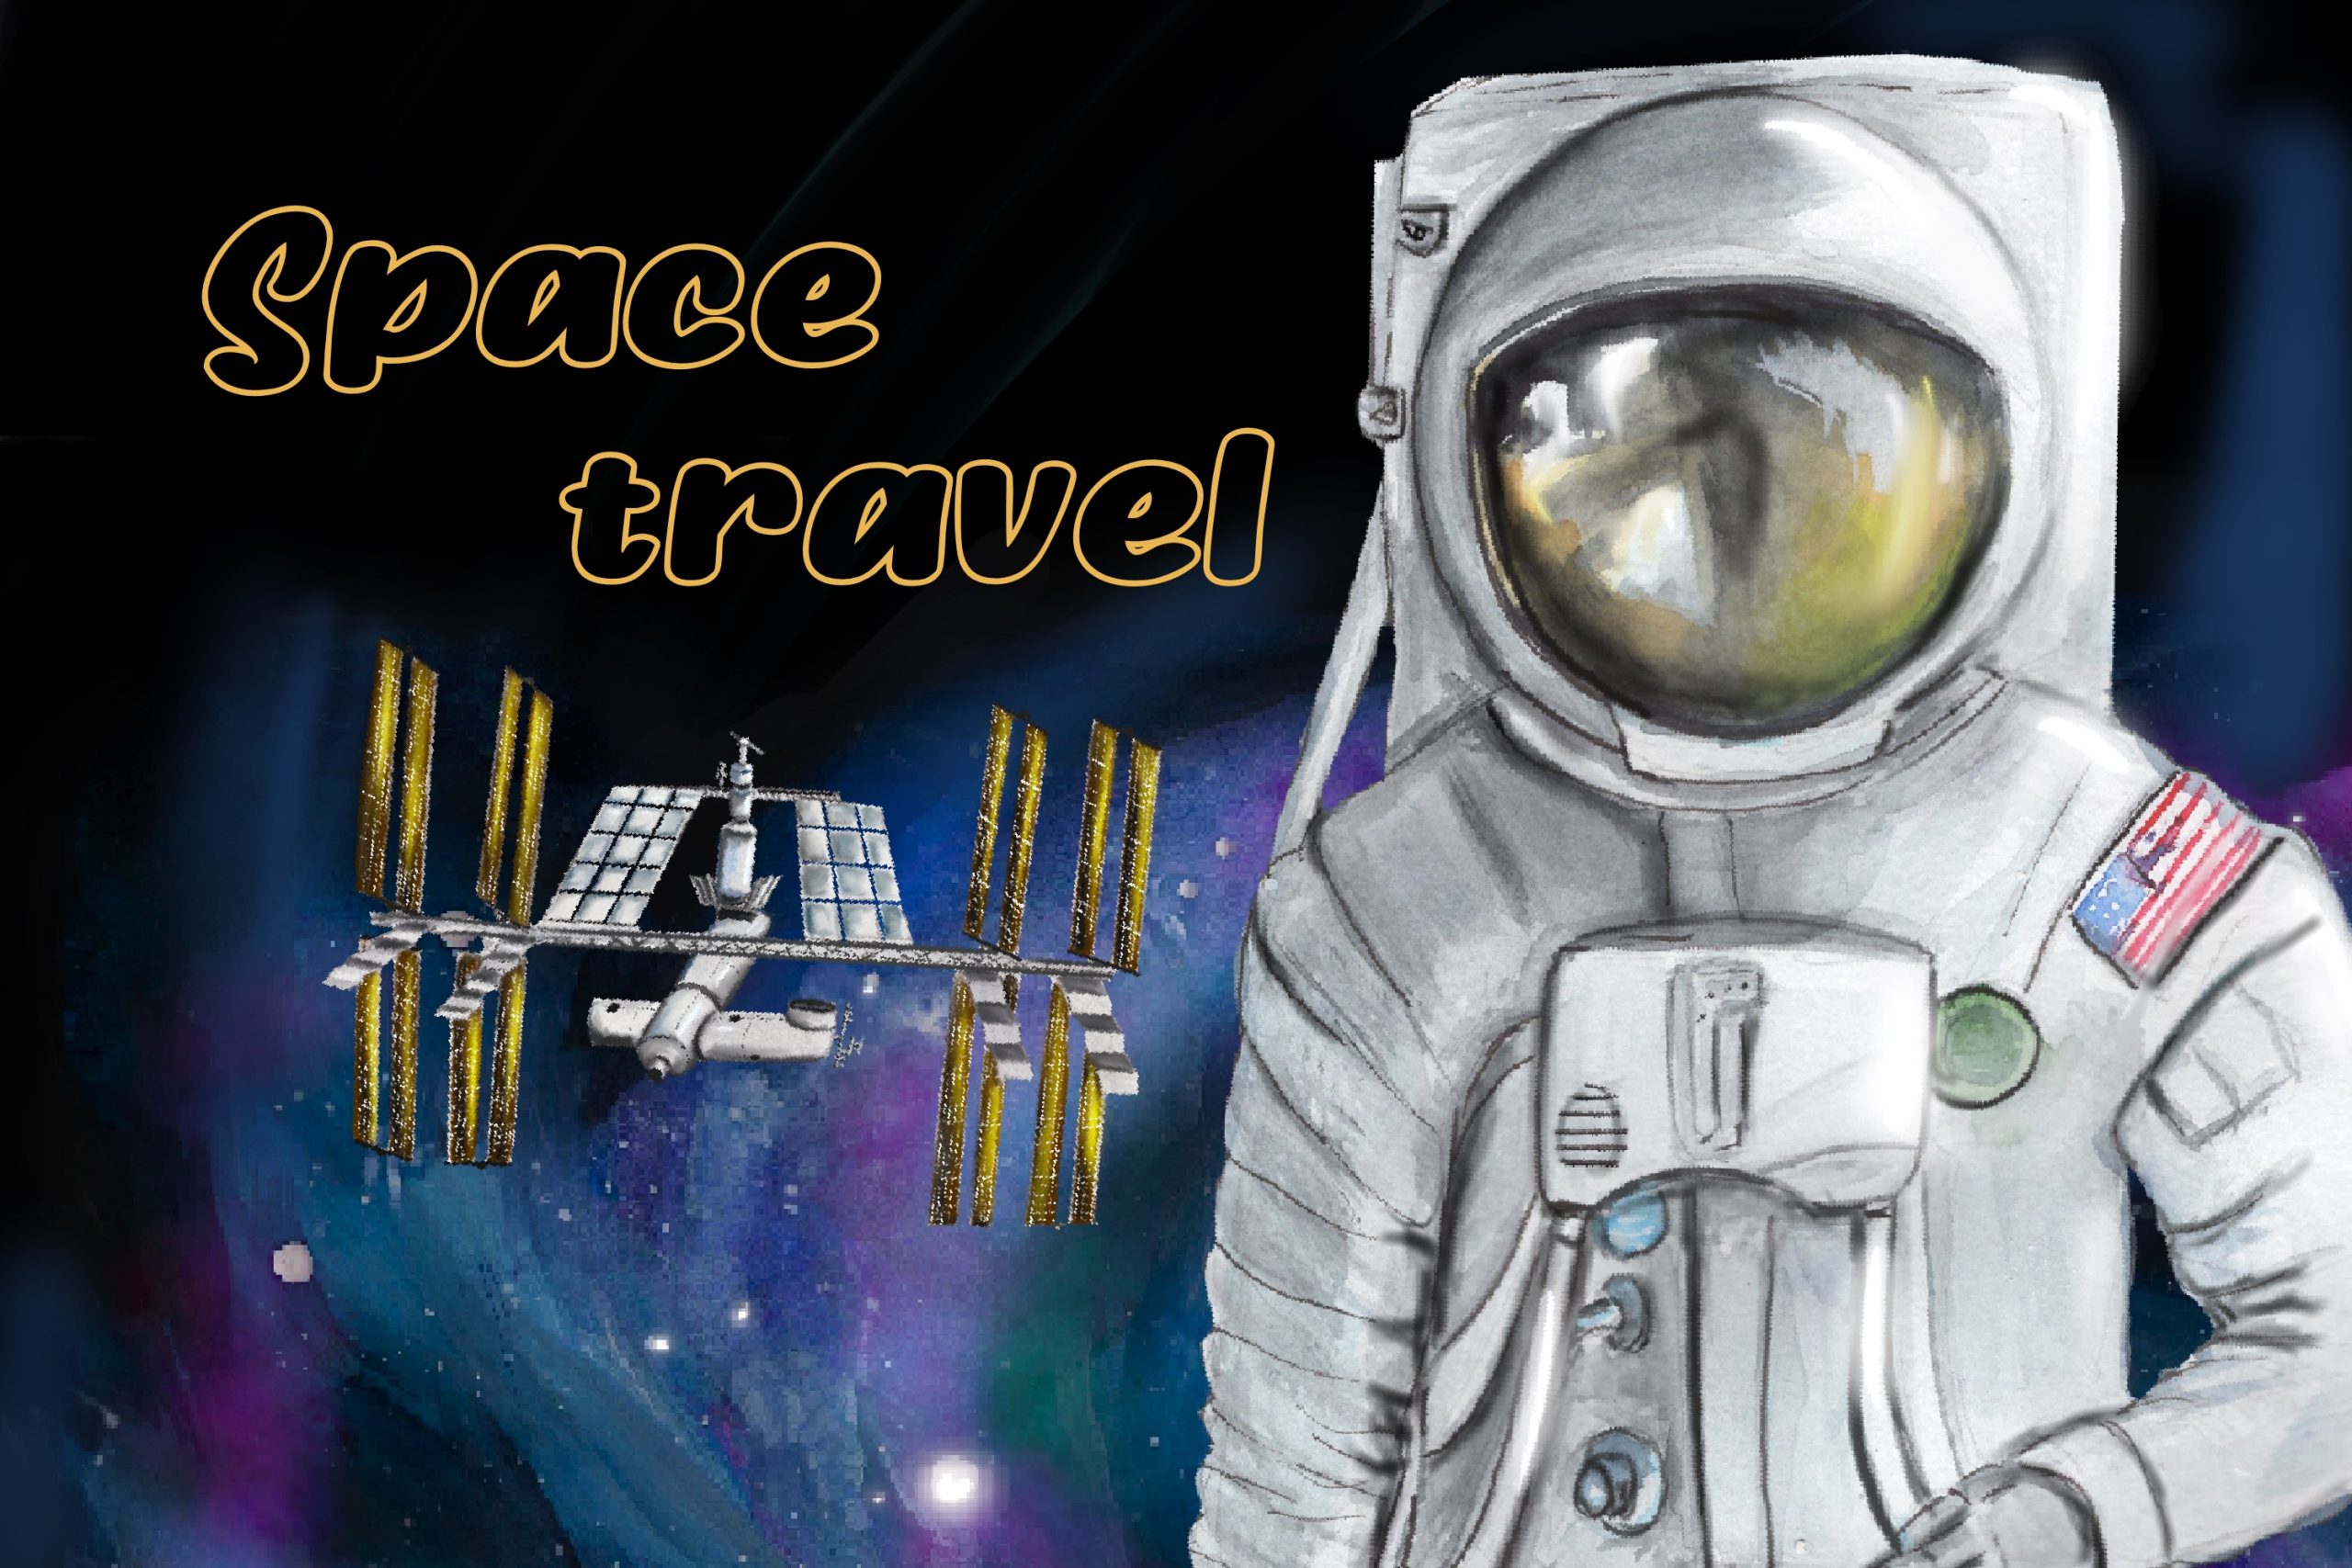 space clipart